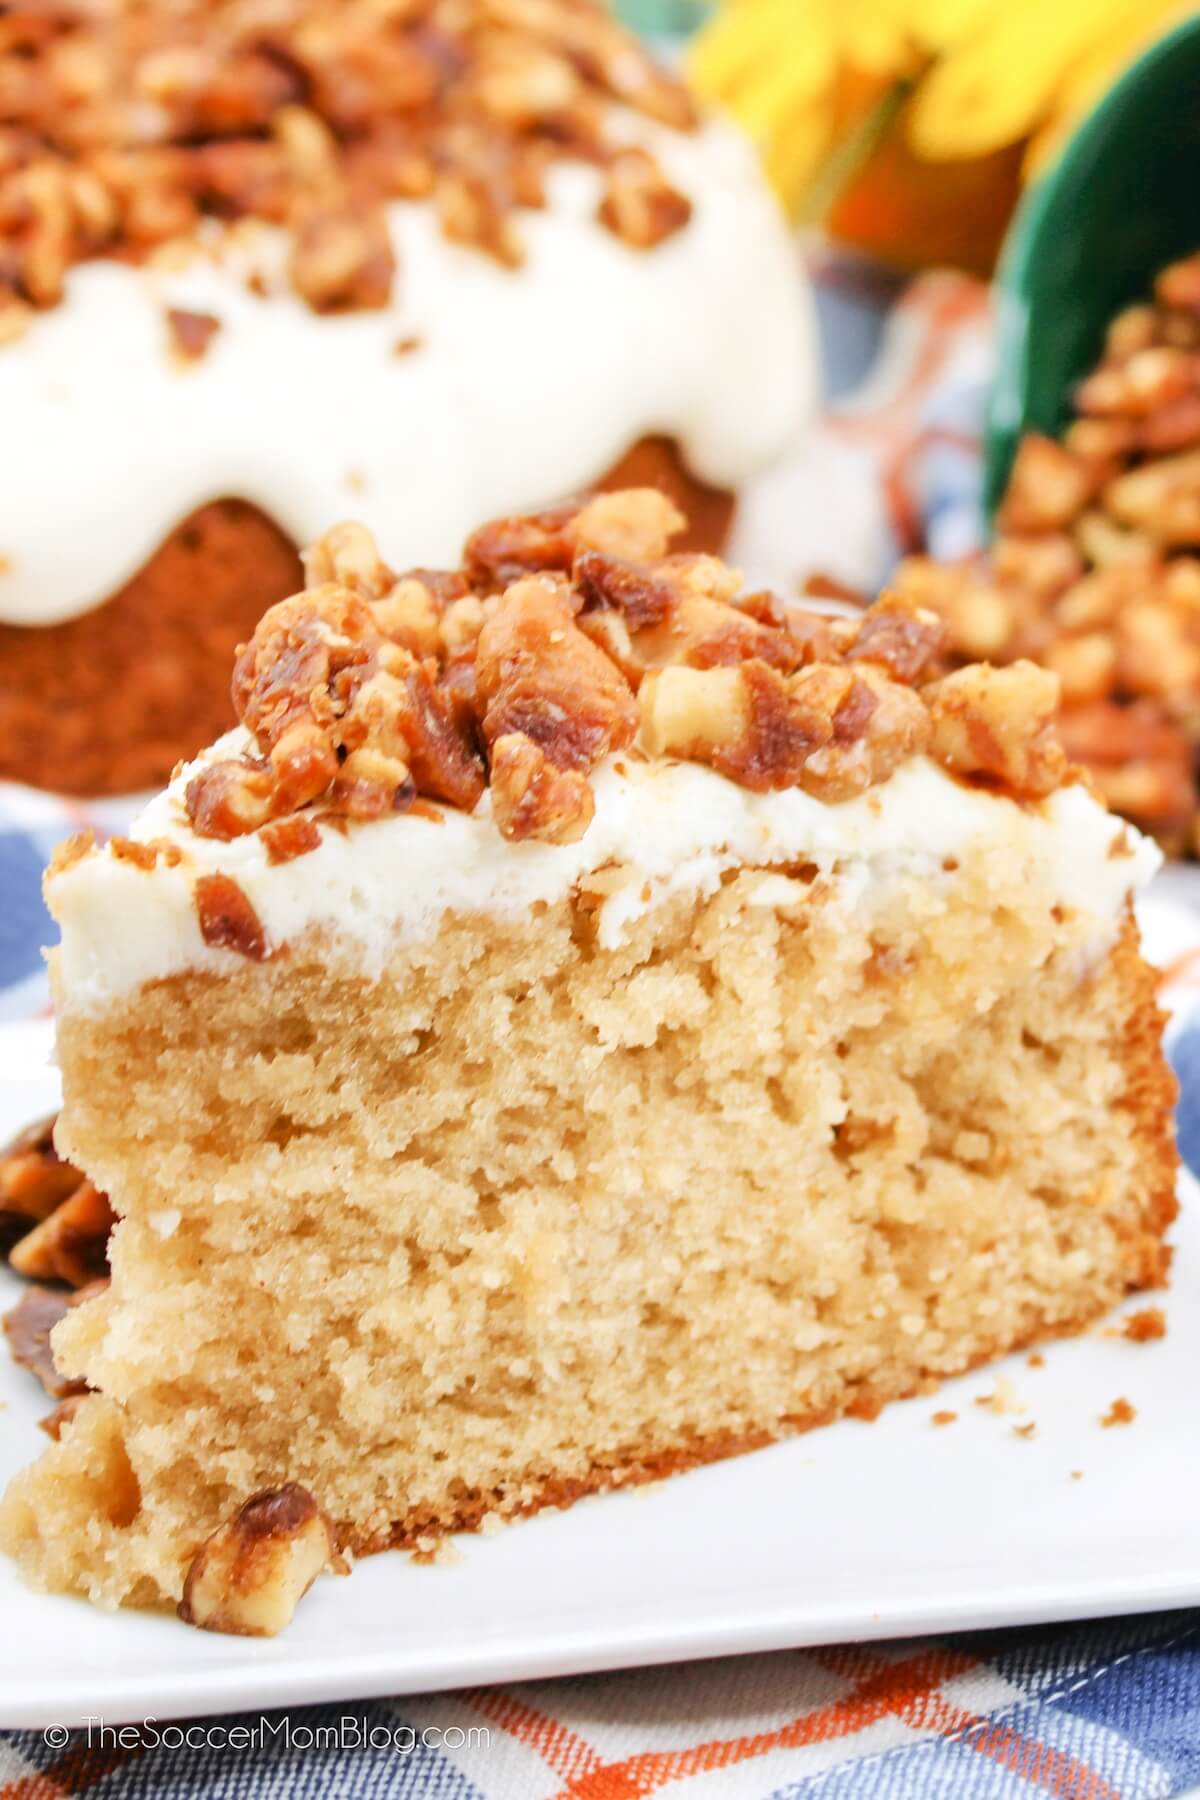 fireball infused cake with glaze and candied pecans